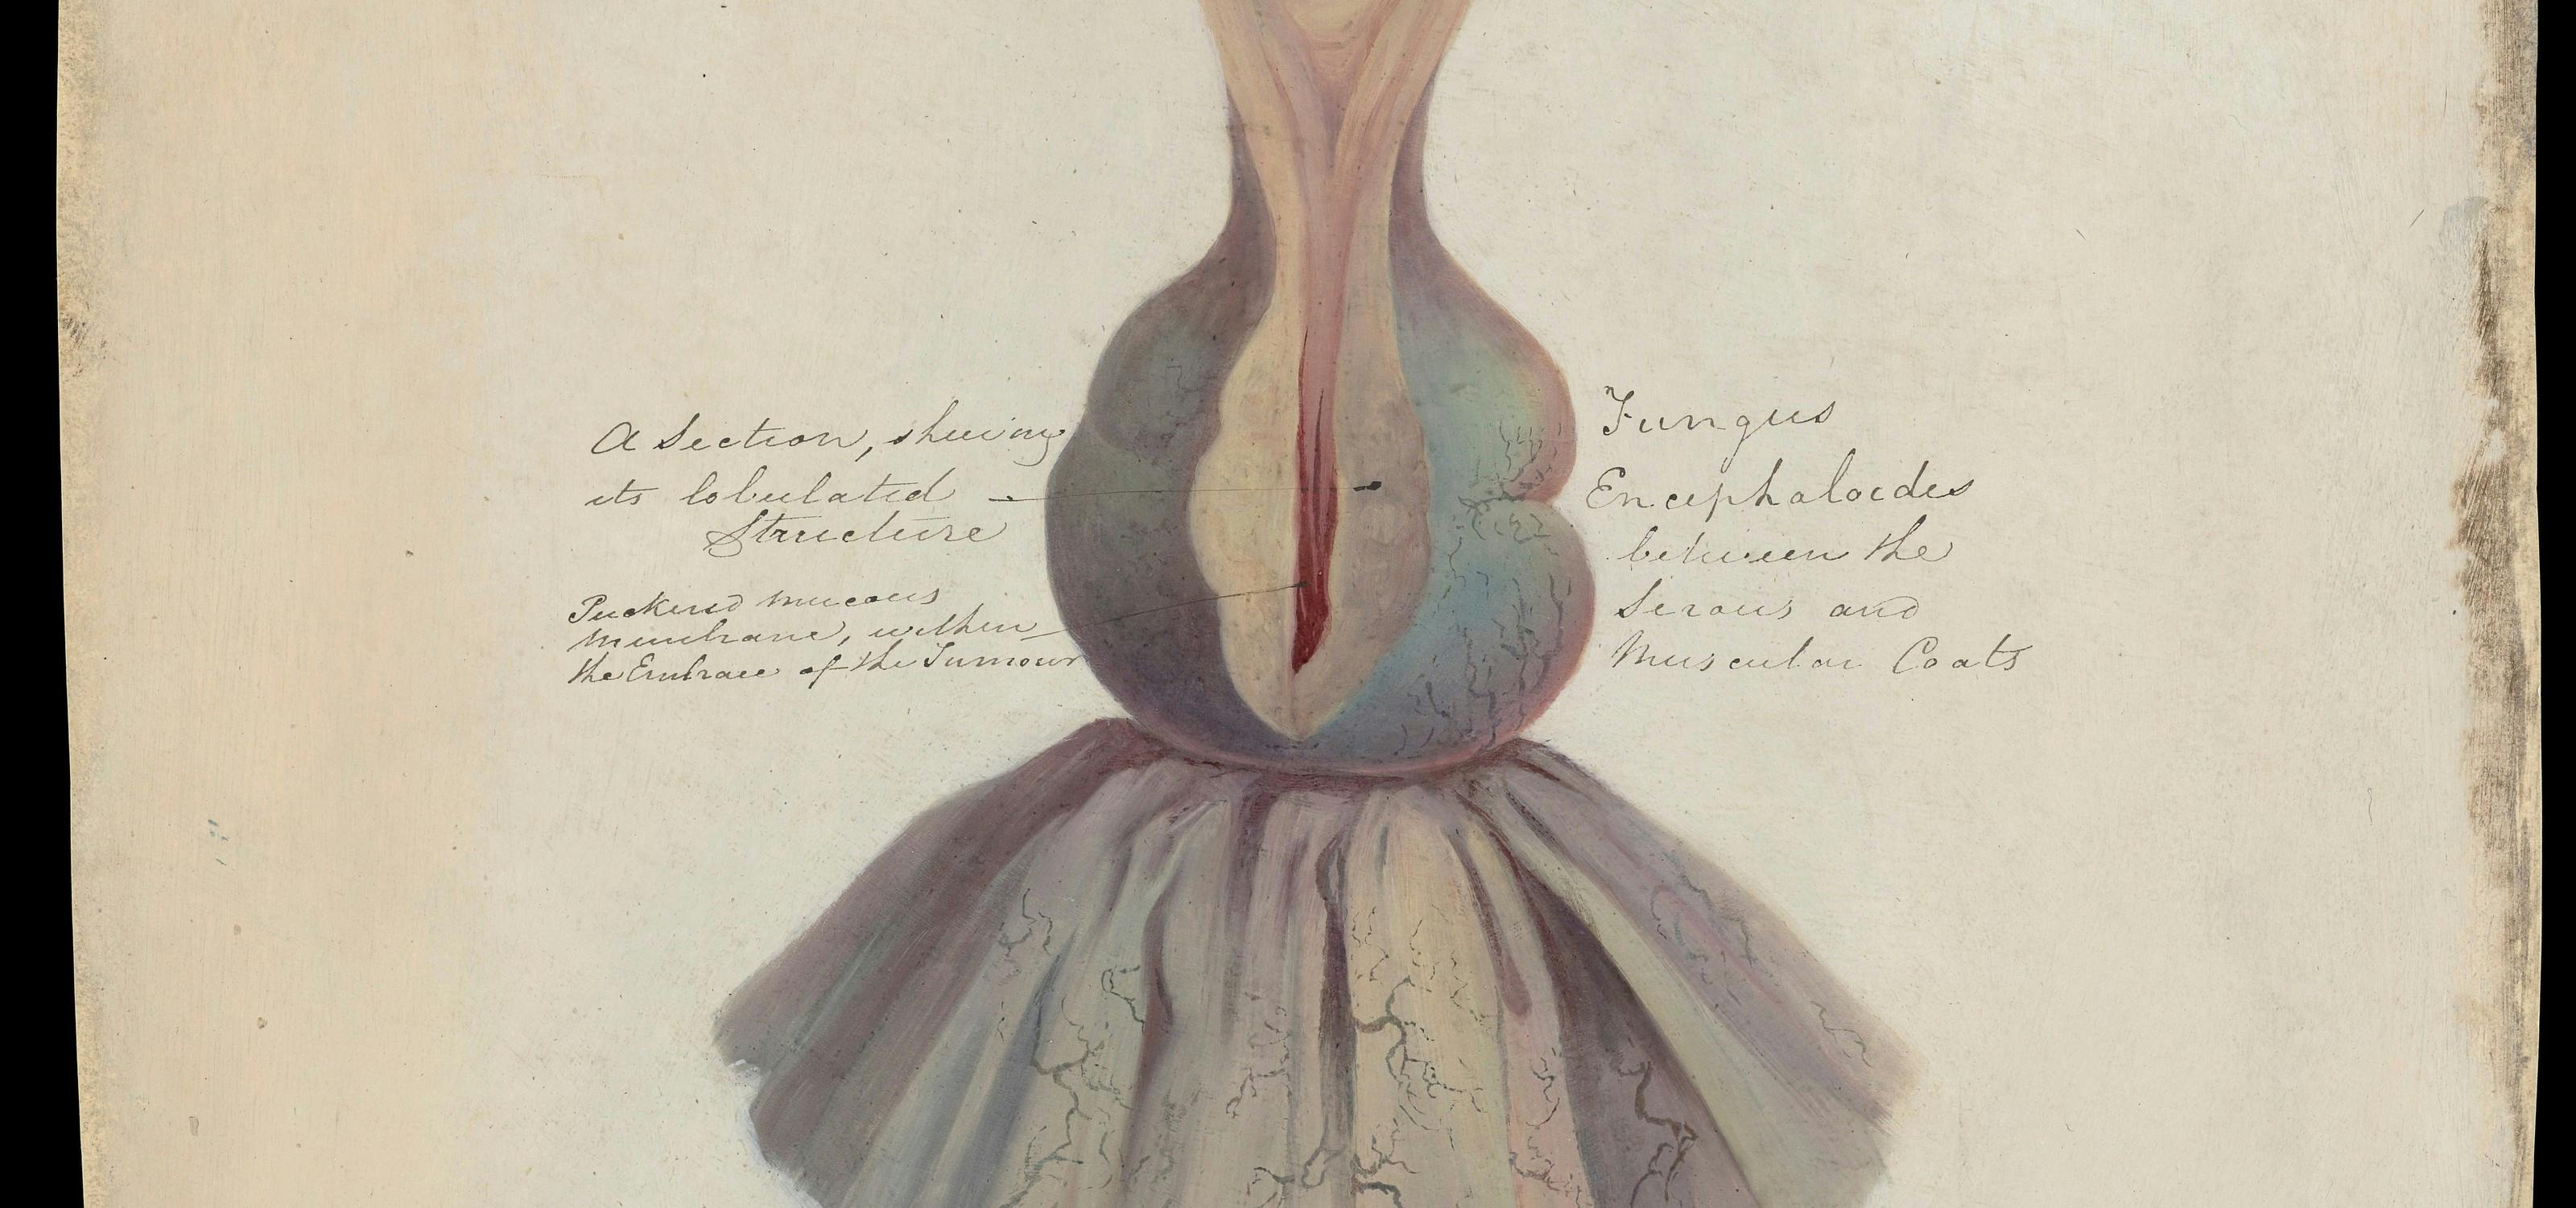 Medical effects of corset wearing. 1881 illustration showing how